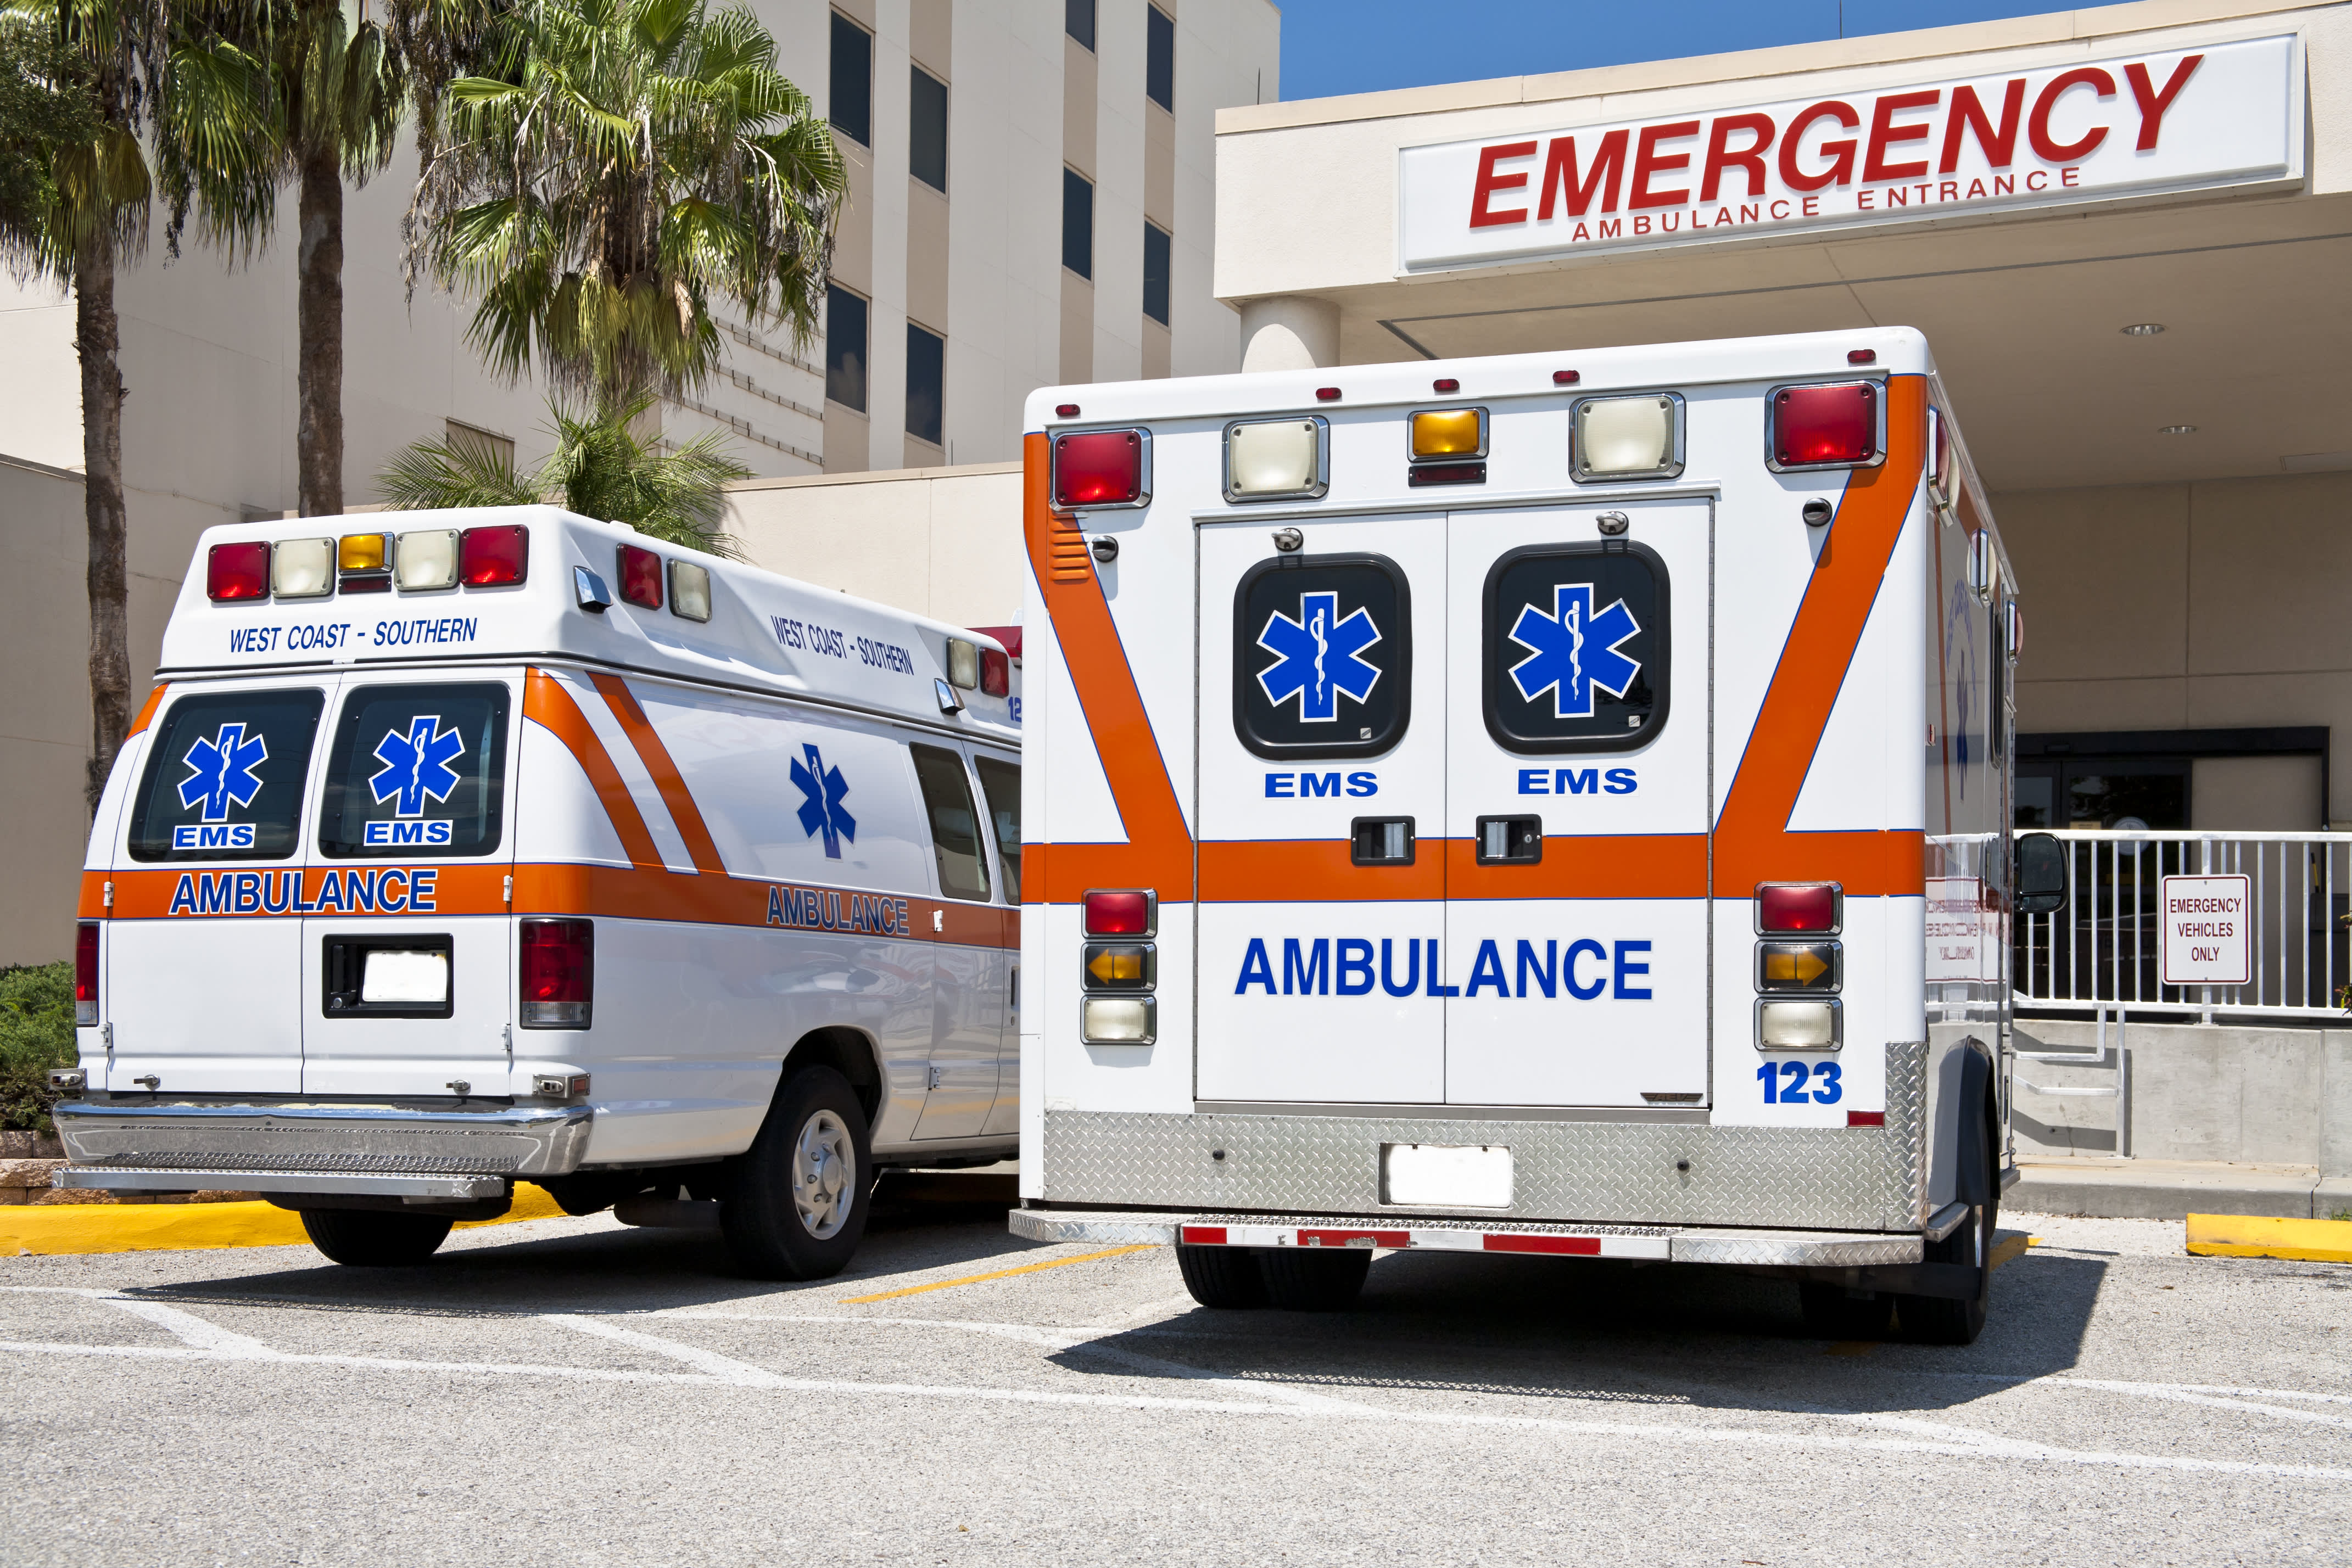 Major ambulance service shuts down without notice in six states